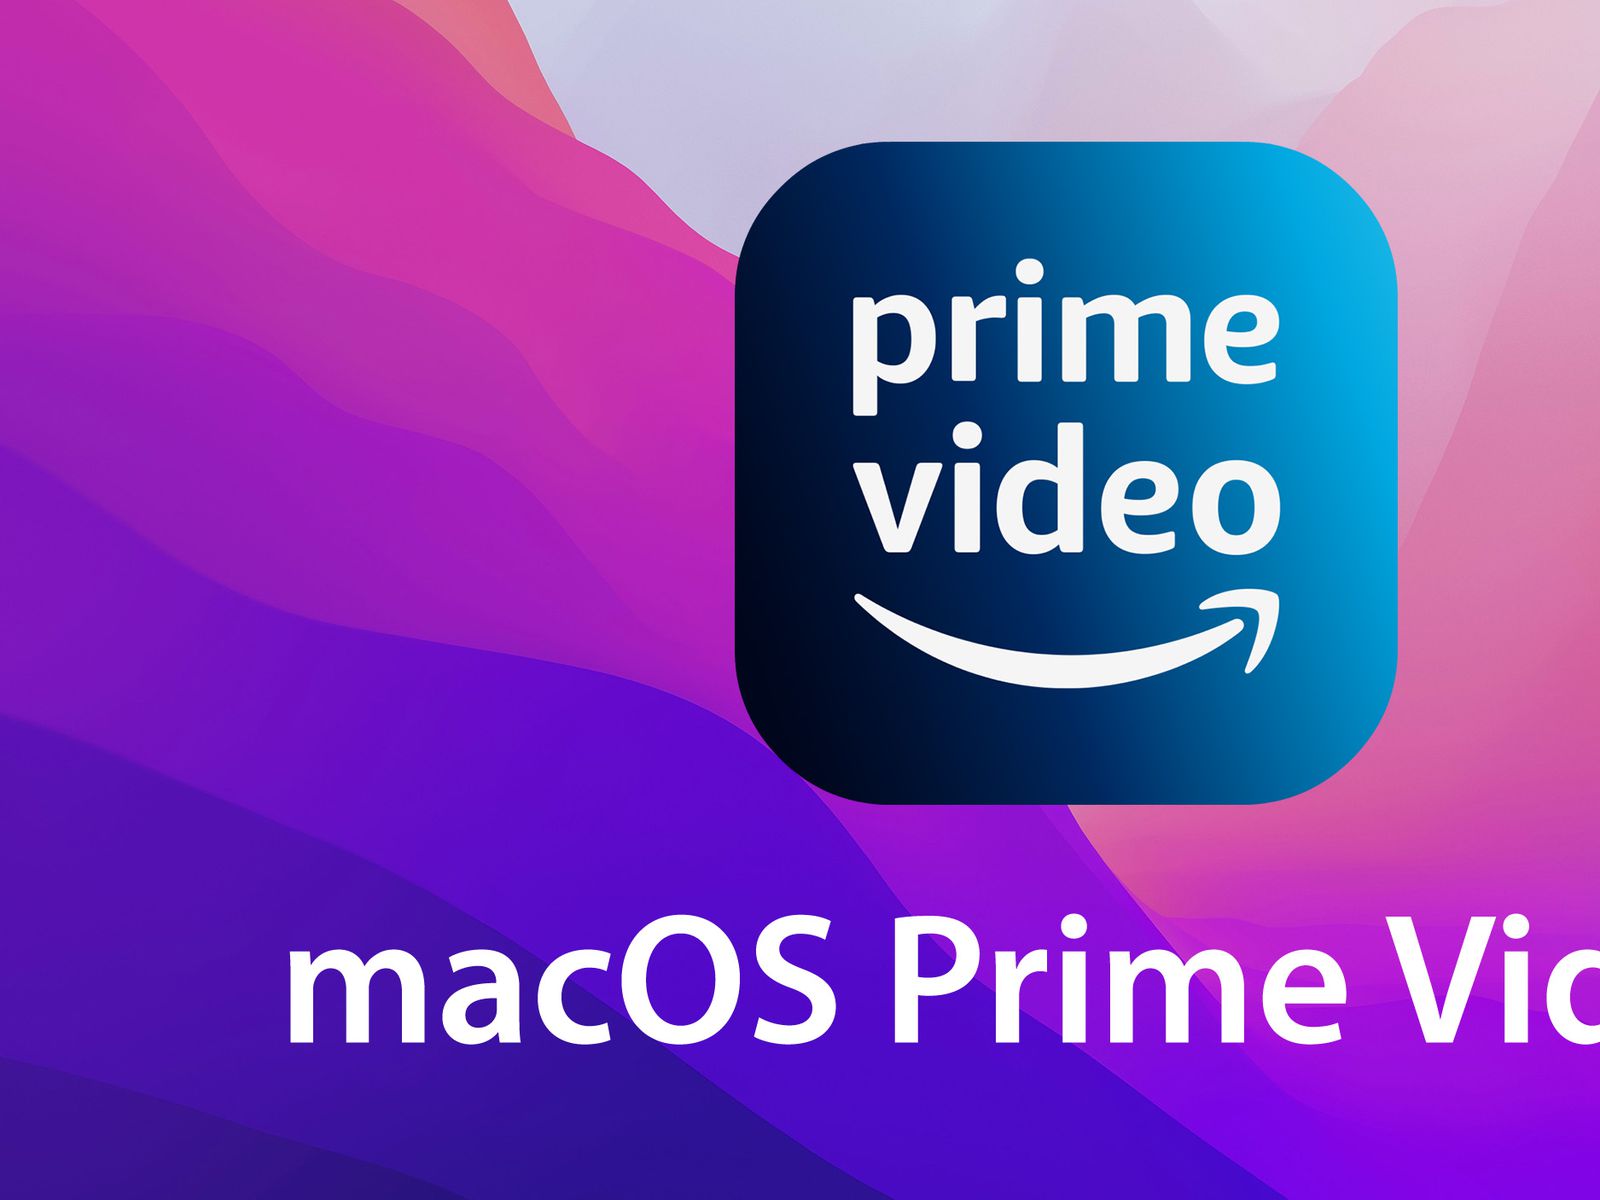 s new Prime Video app for Mac enables local downloads on desktop